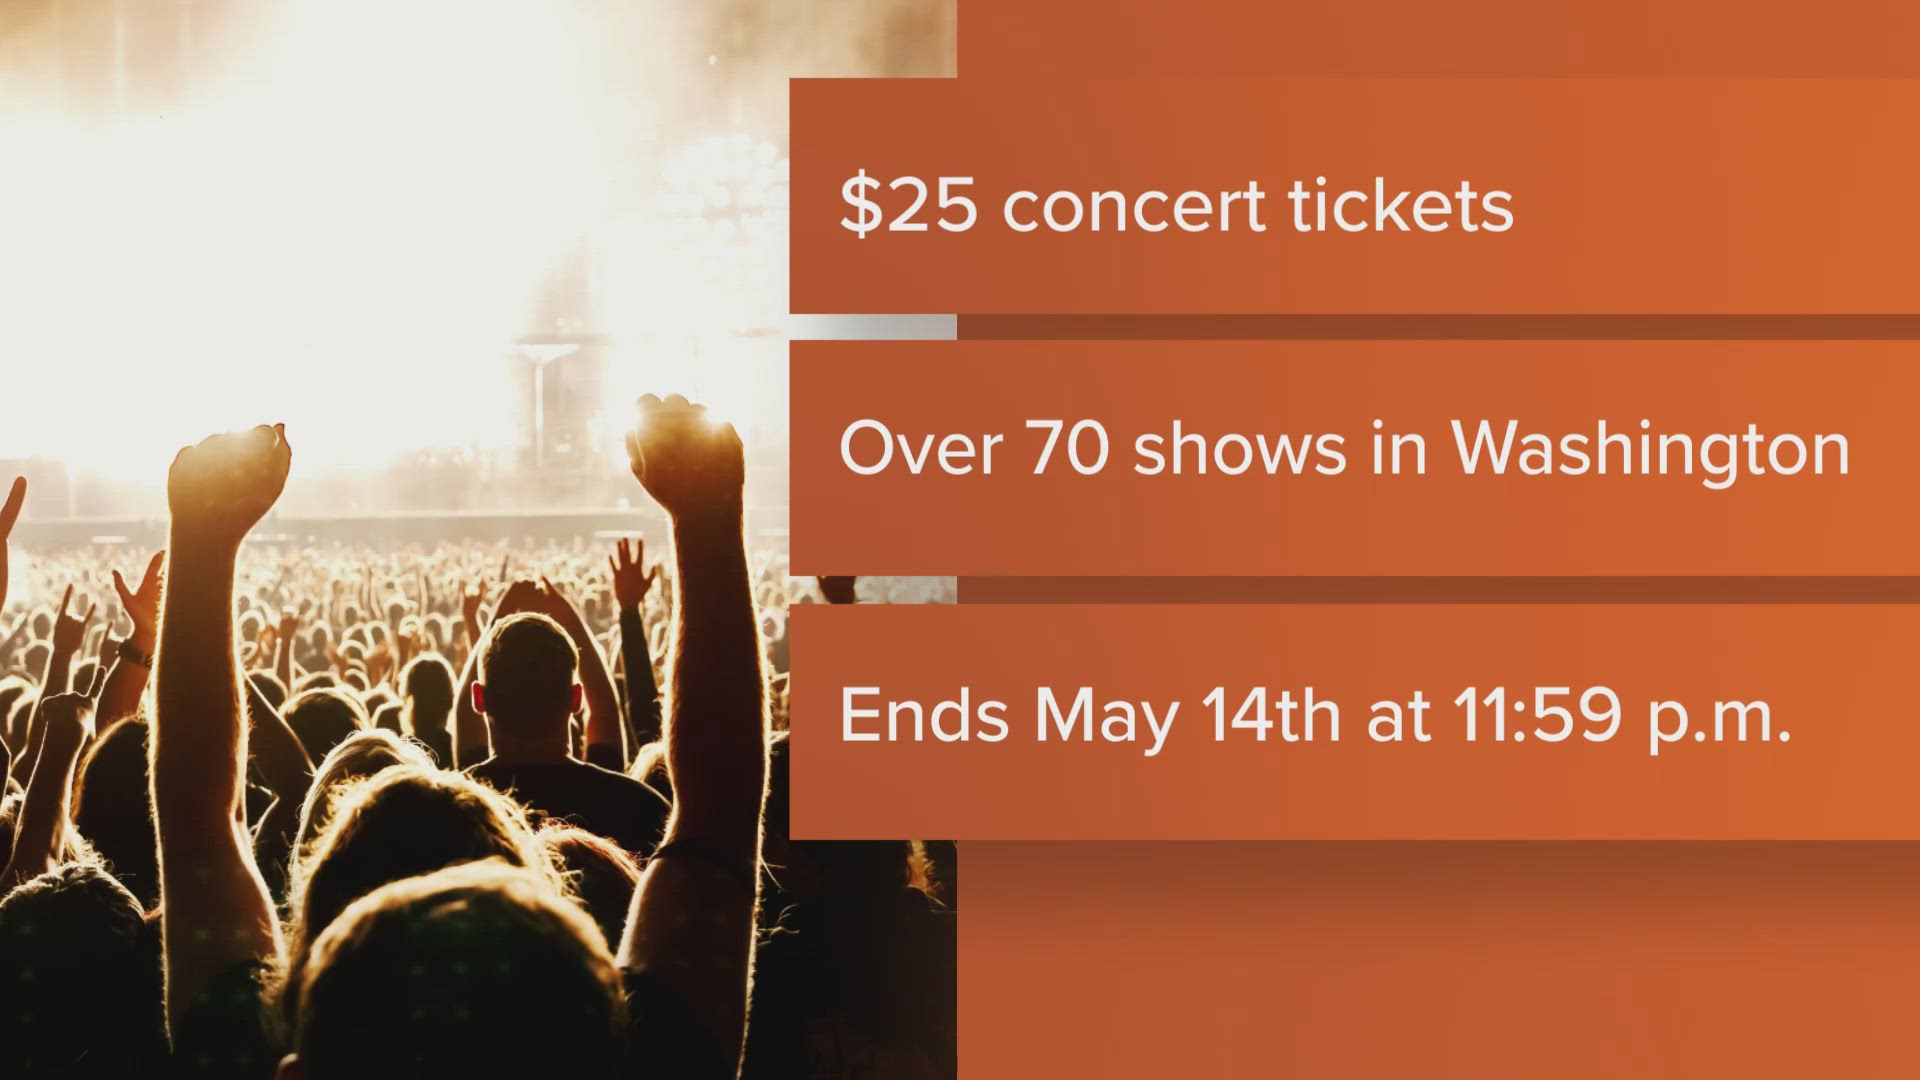 This week fans can score tickets to over 70 shows in Washington state via Live Nation's annual Concert Week event — for just $25.